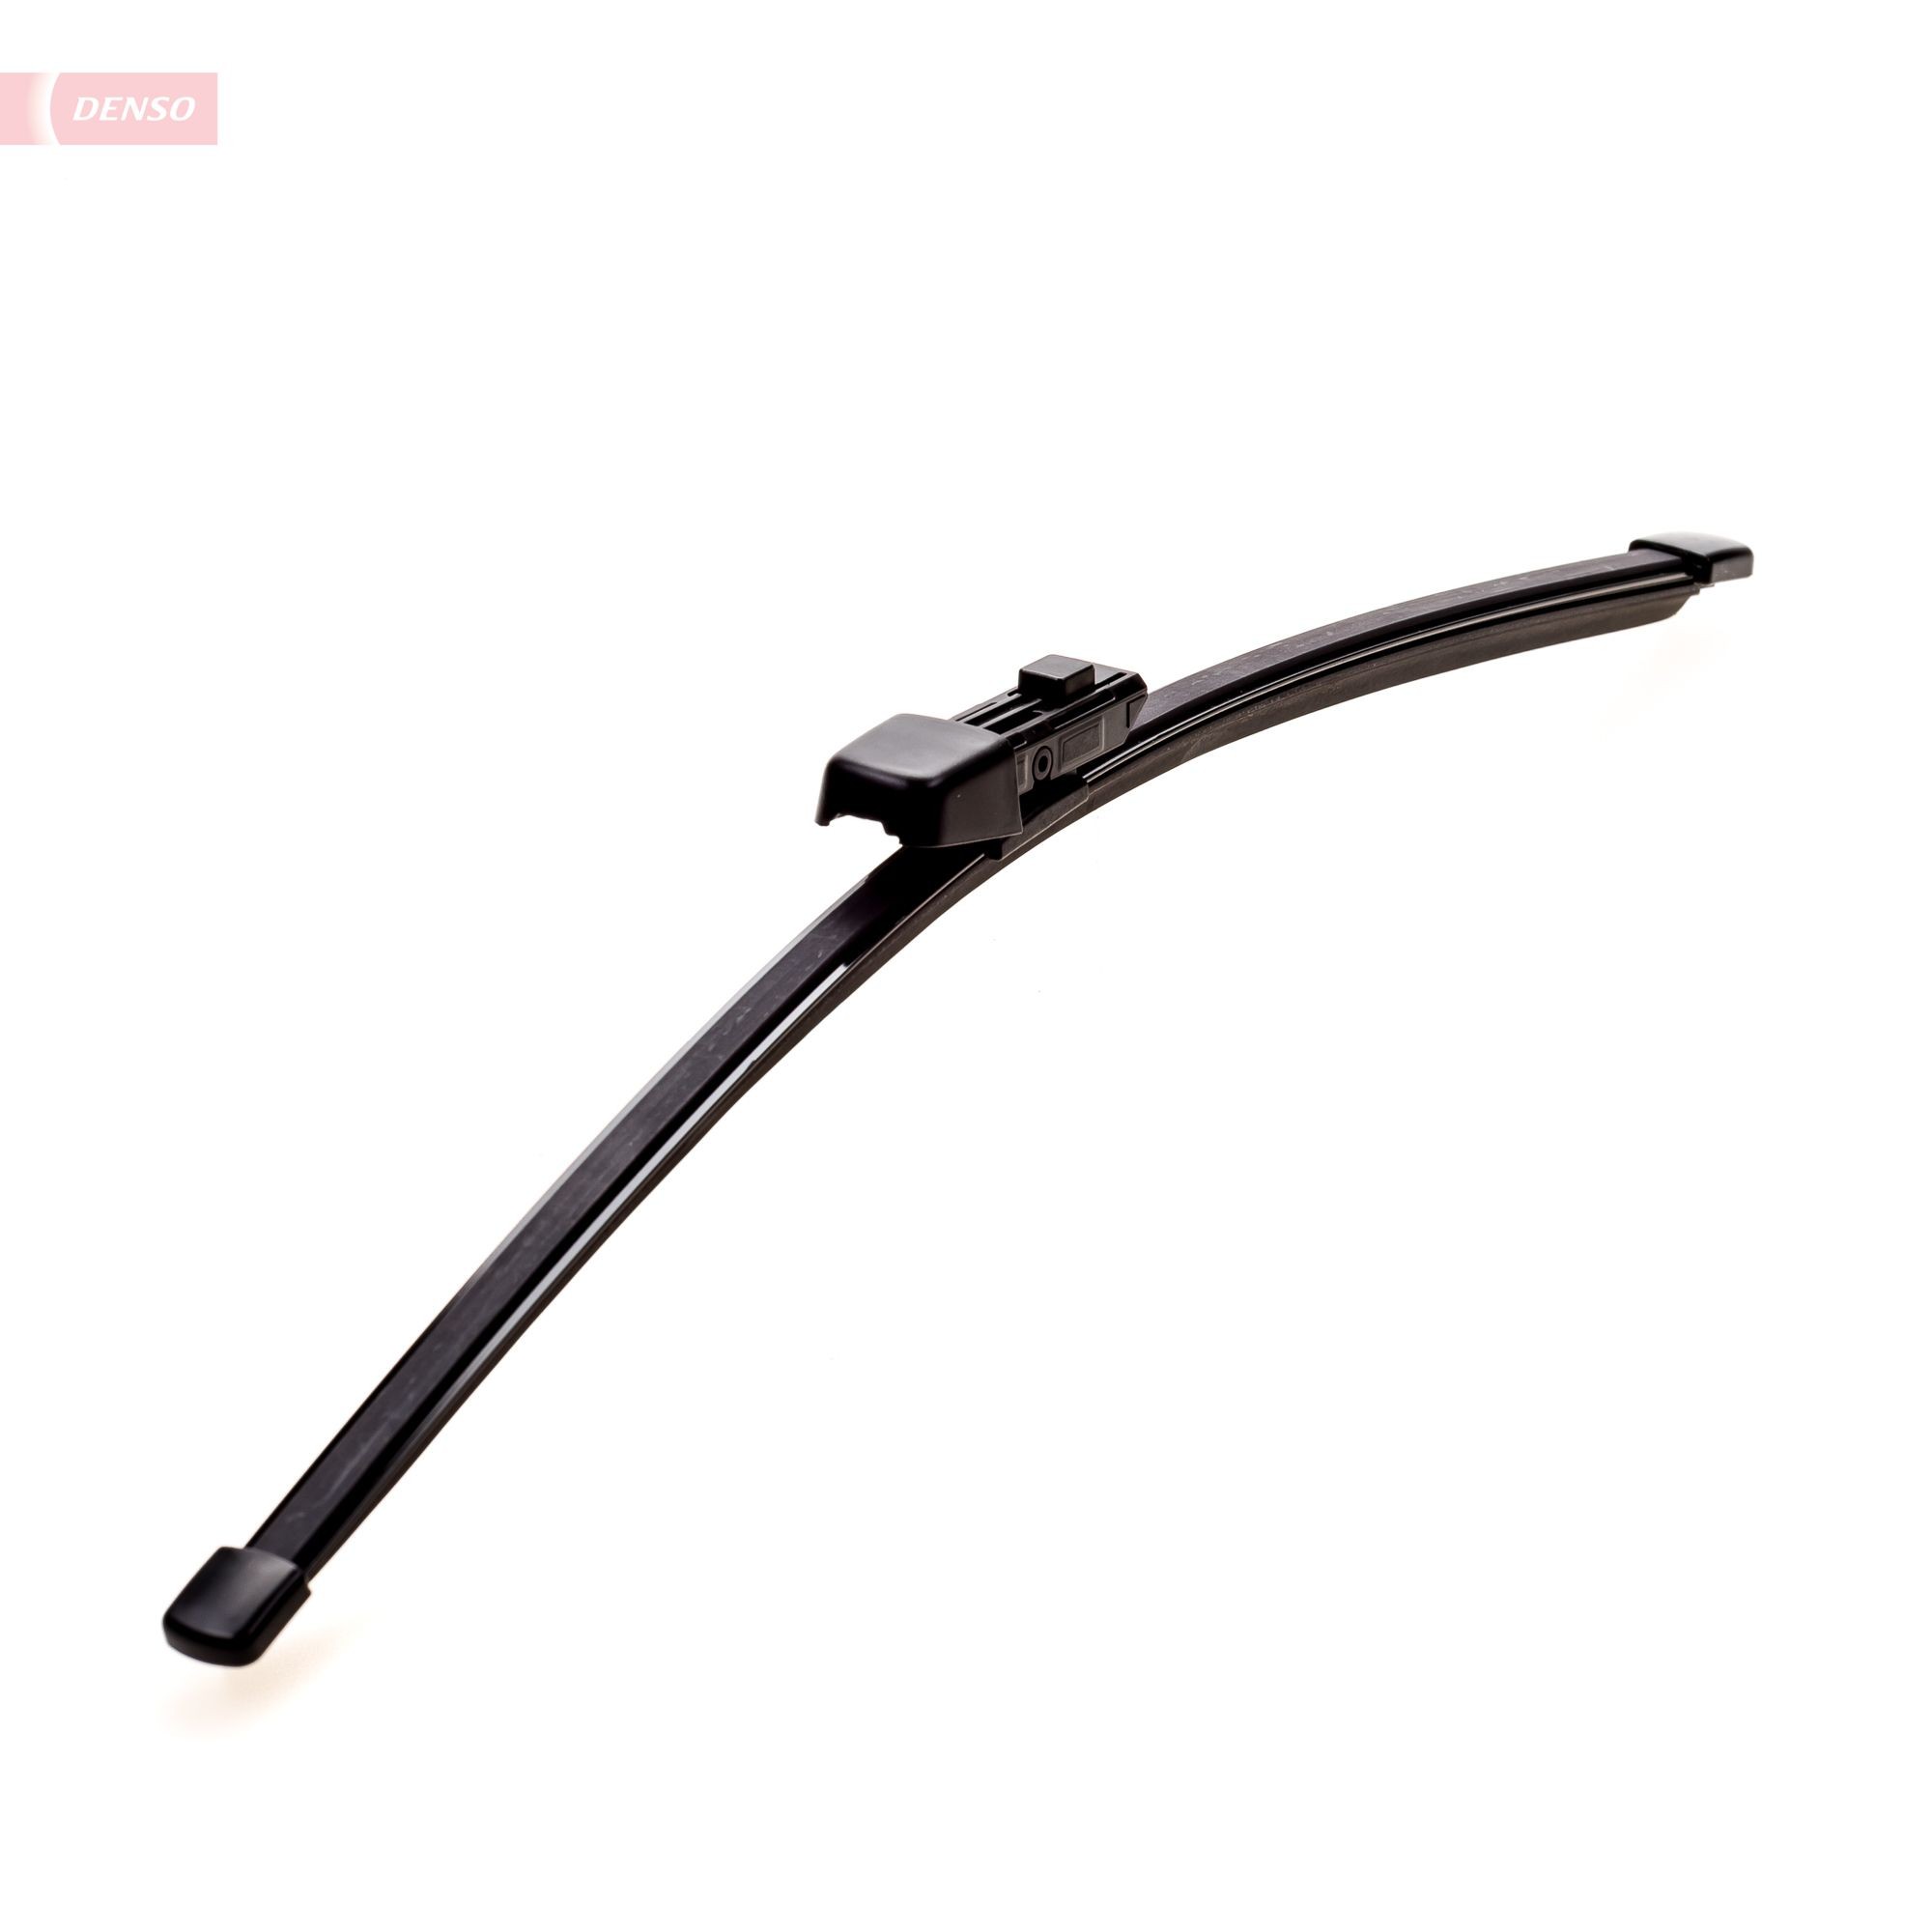 Original DENSO Windshield wipers DF-315 for VW SHARAN